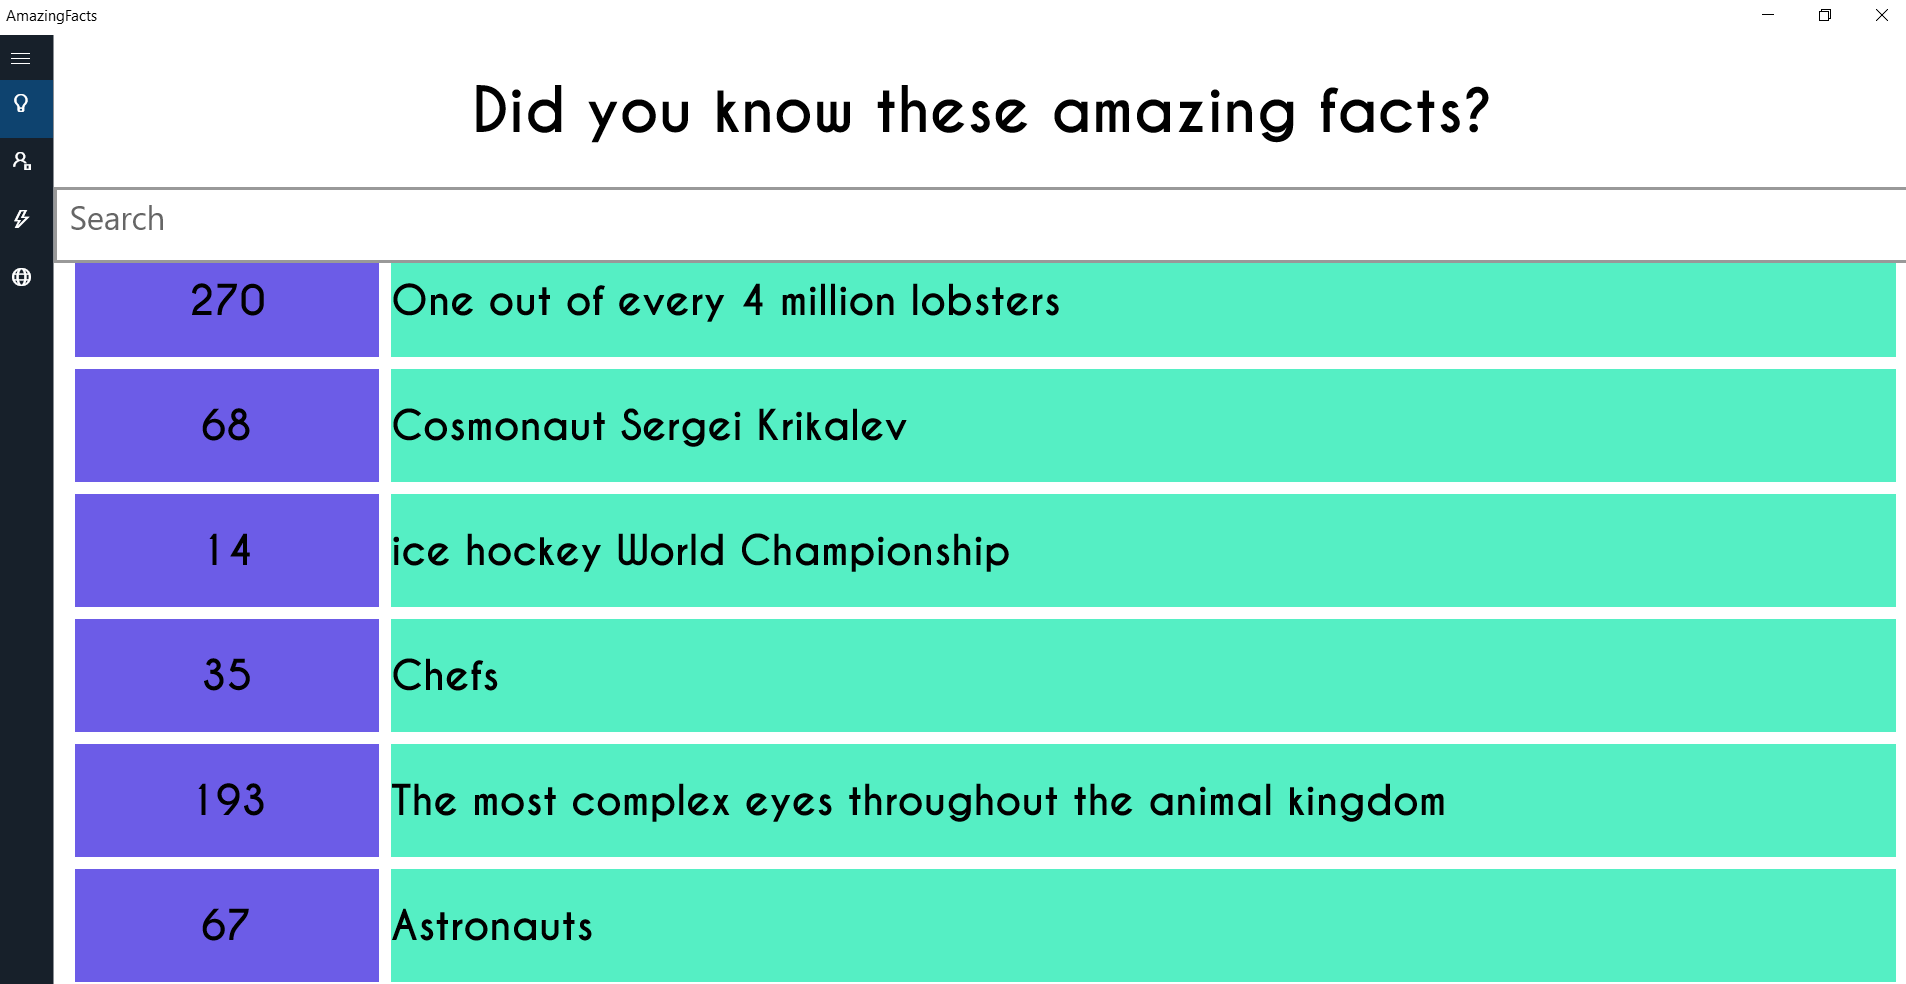 Amazing facts-Did you know?